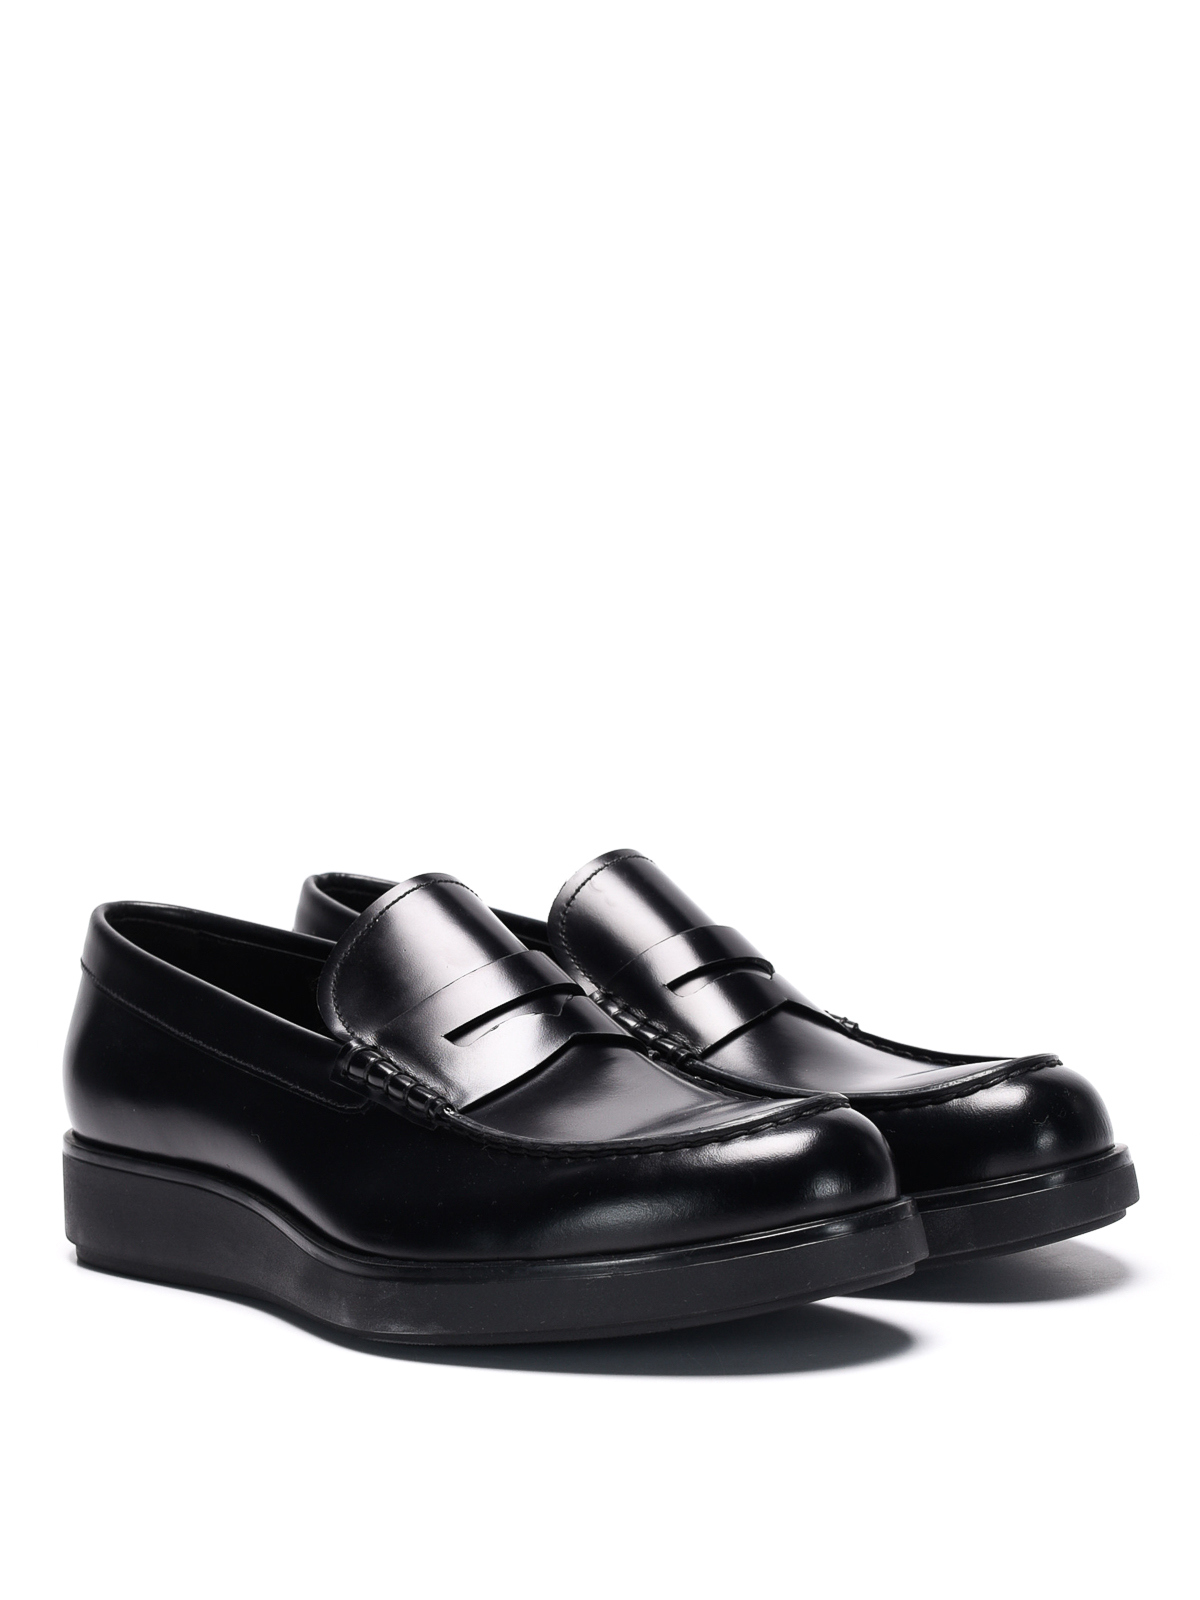 prada brushed leather loafers